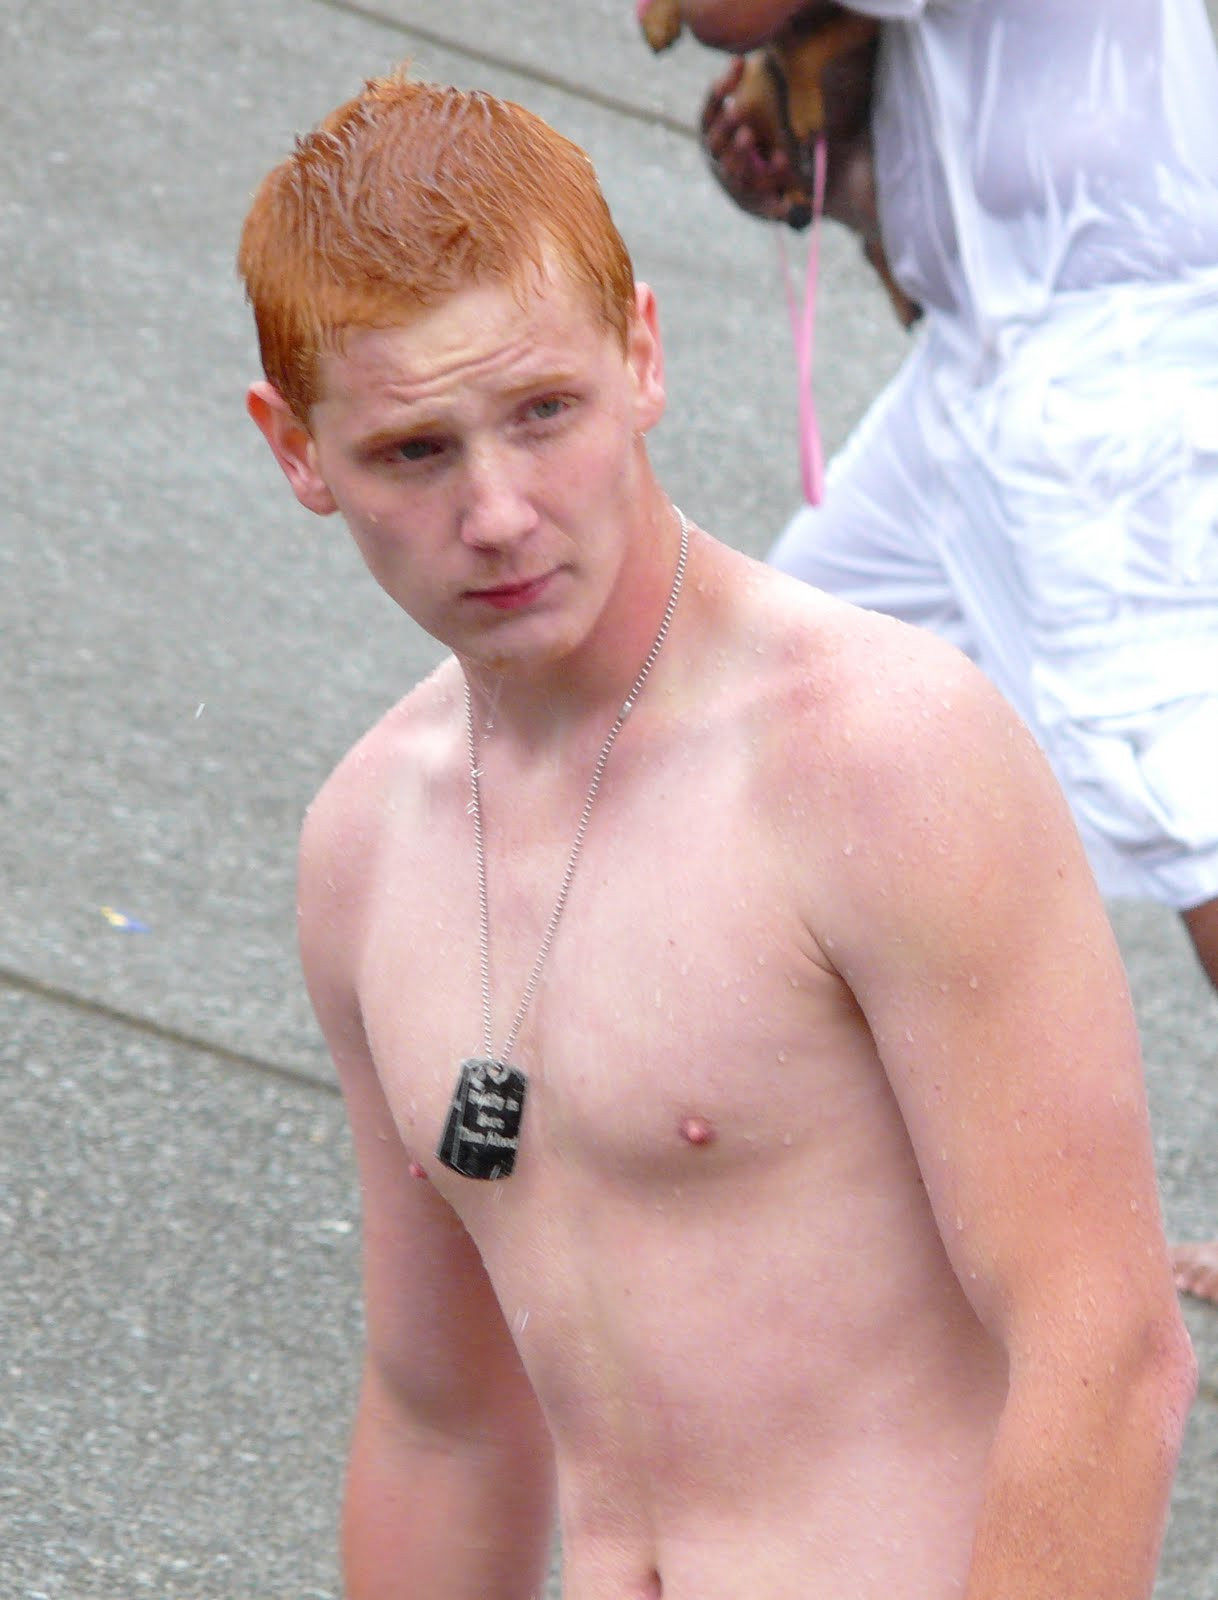 Mens Pubic Hairstyle
 Red Headed Men Shirtless Freckled Gingers